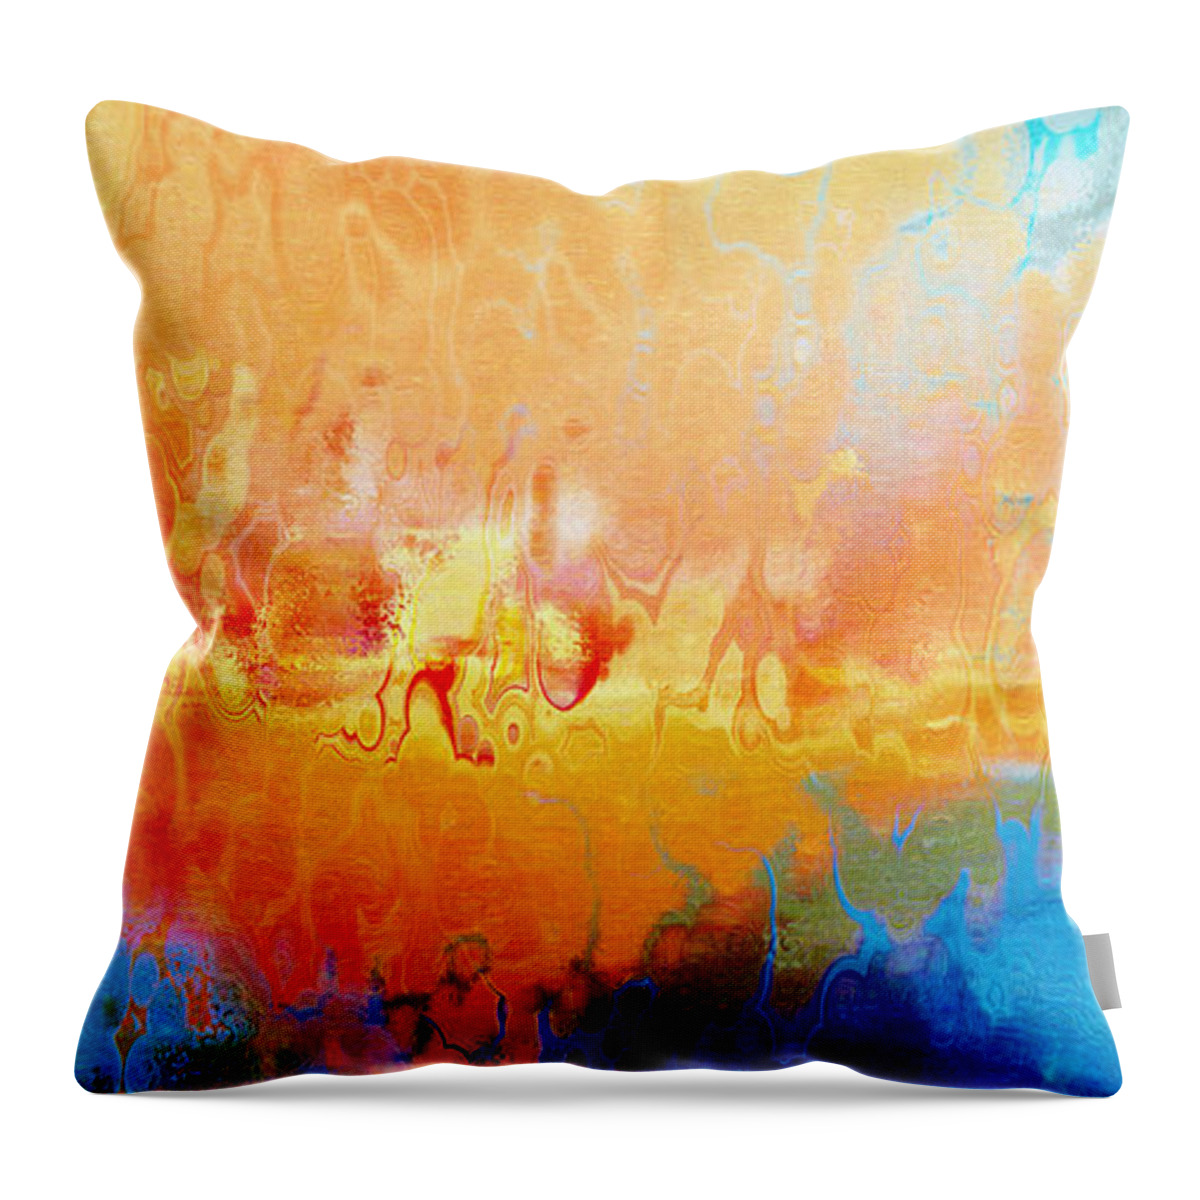 Abstract Art Throw Pillow featuring the painting Slice Of Heaven Horizontal - Abstract Art by Jaison Cianelli